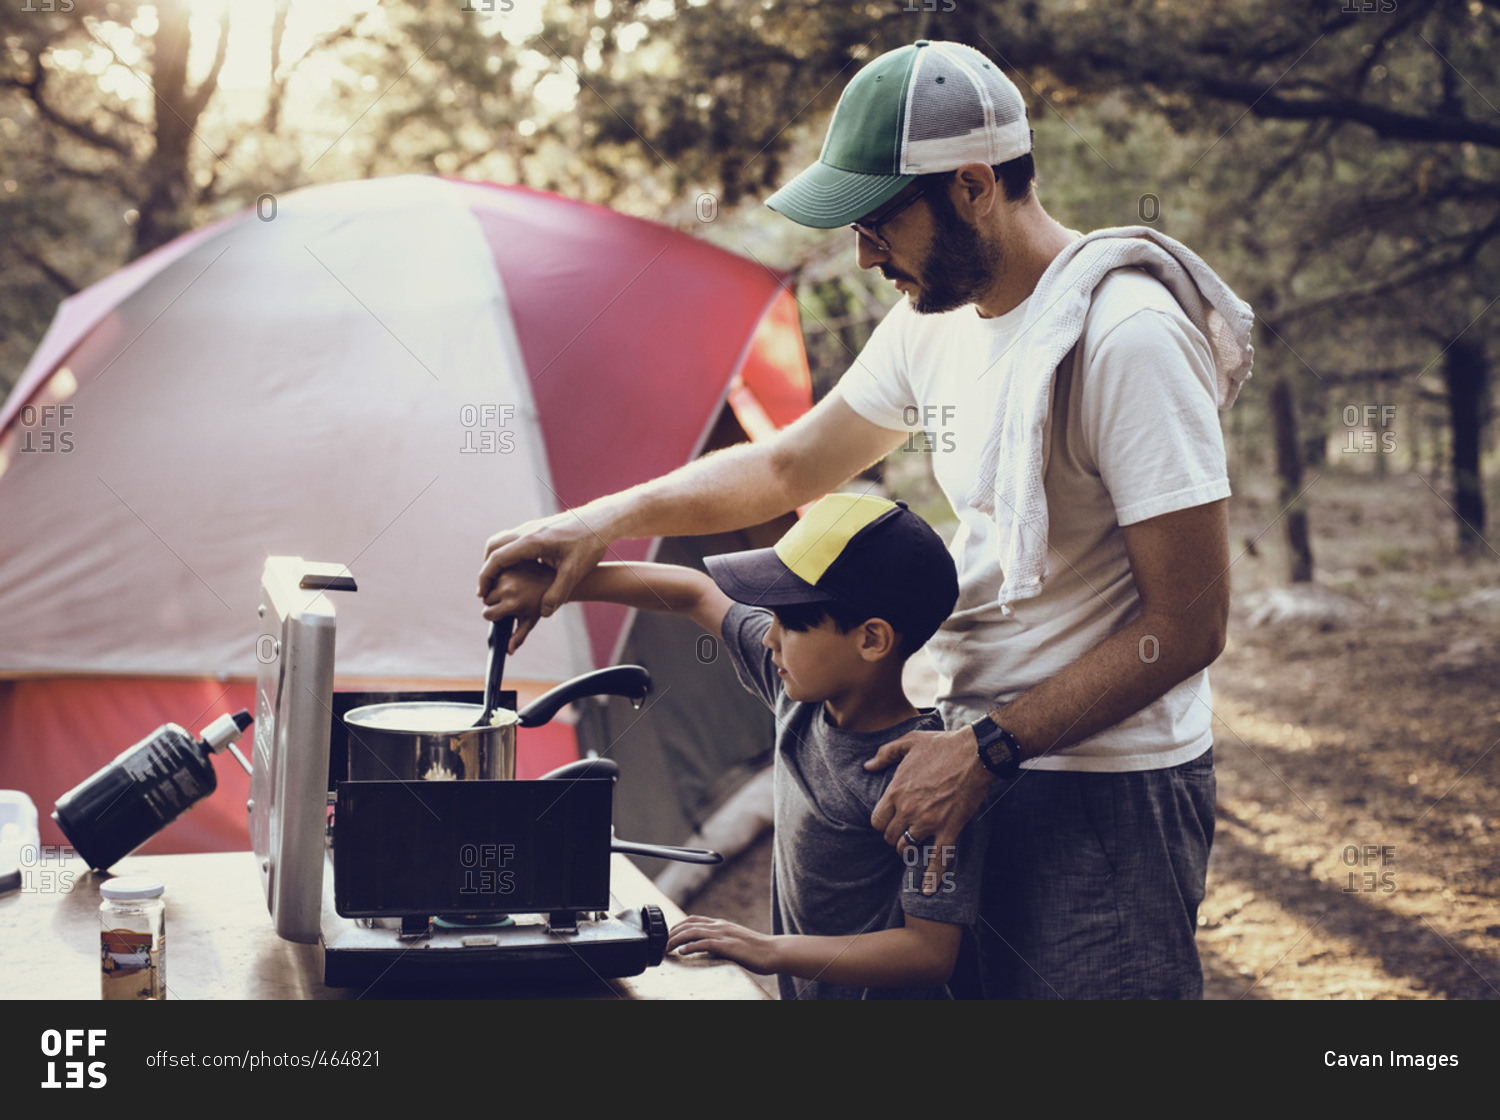 Father and son preparing food on camping stove in forest